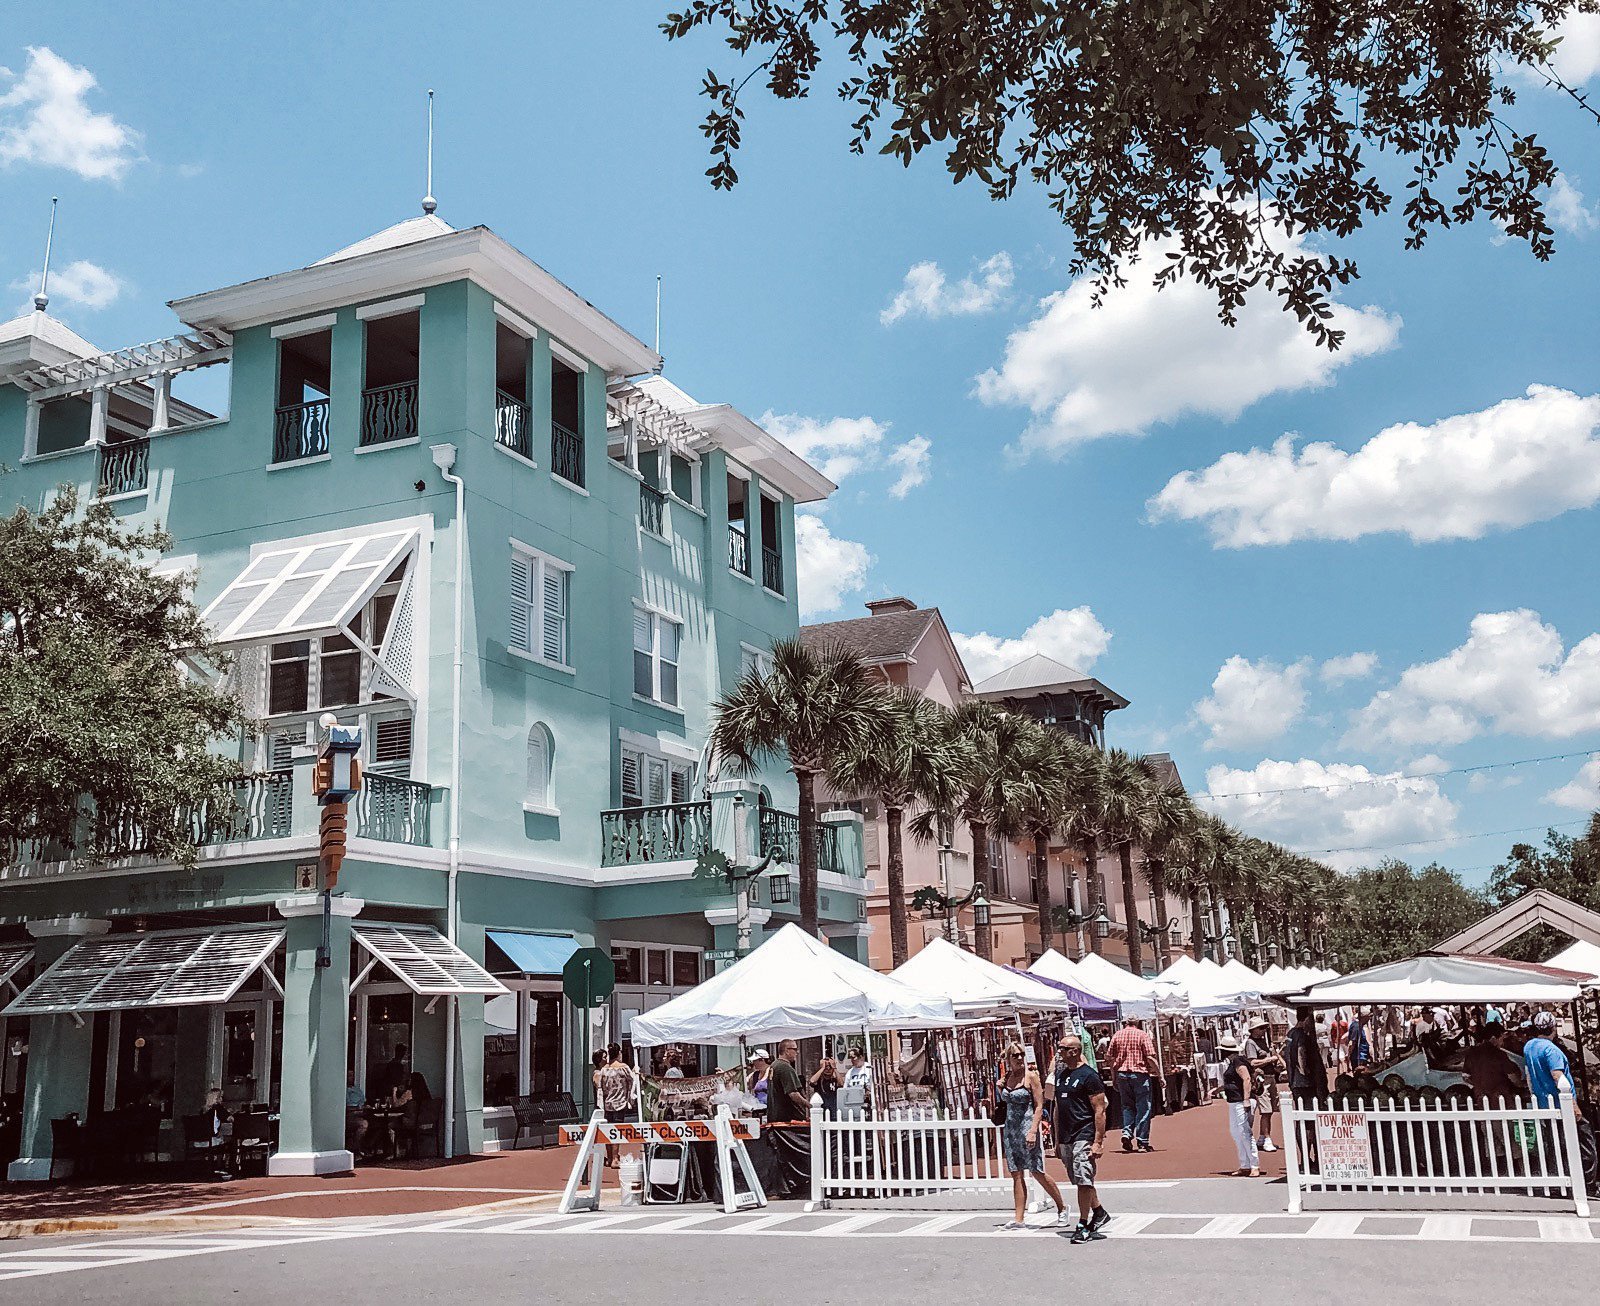 Visiting the town of Celebration, Florida